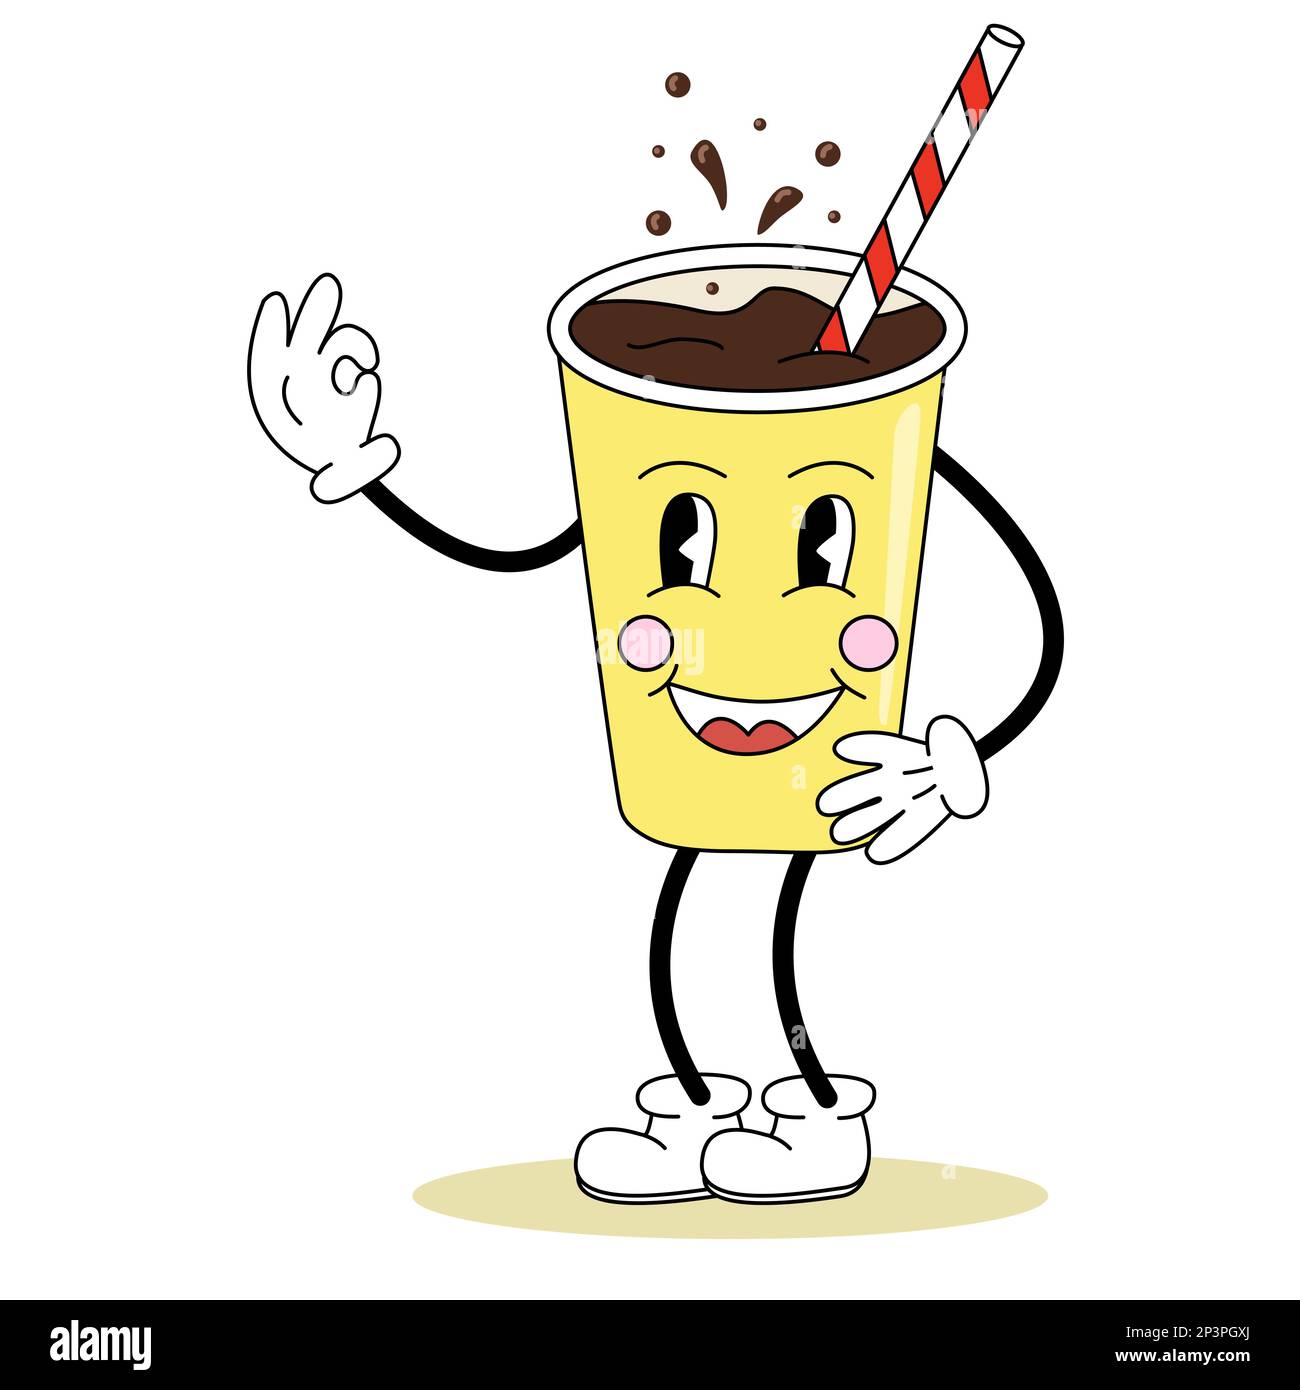 https://c8.alamy.com/comp/2P3PGXJ/retro-style-cute-soft-soda-drink-cartoon-character-with-a-straw-eyes-legs-and-arms-vector-illustration-2P3PGXJ.jpg